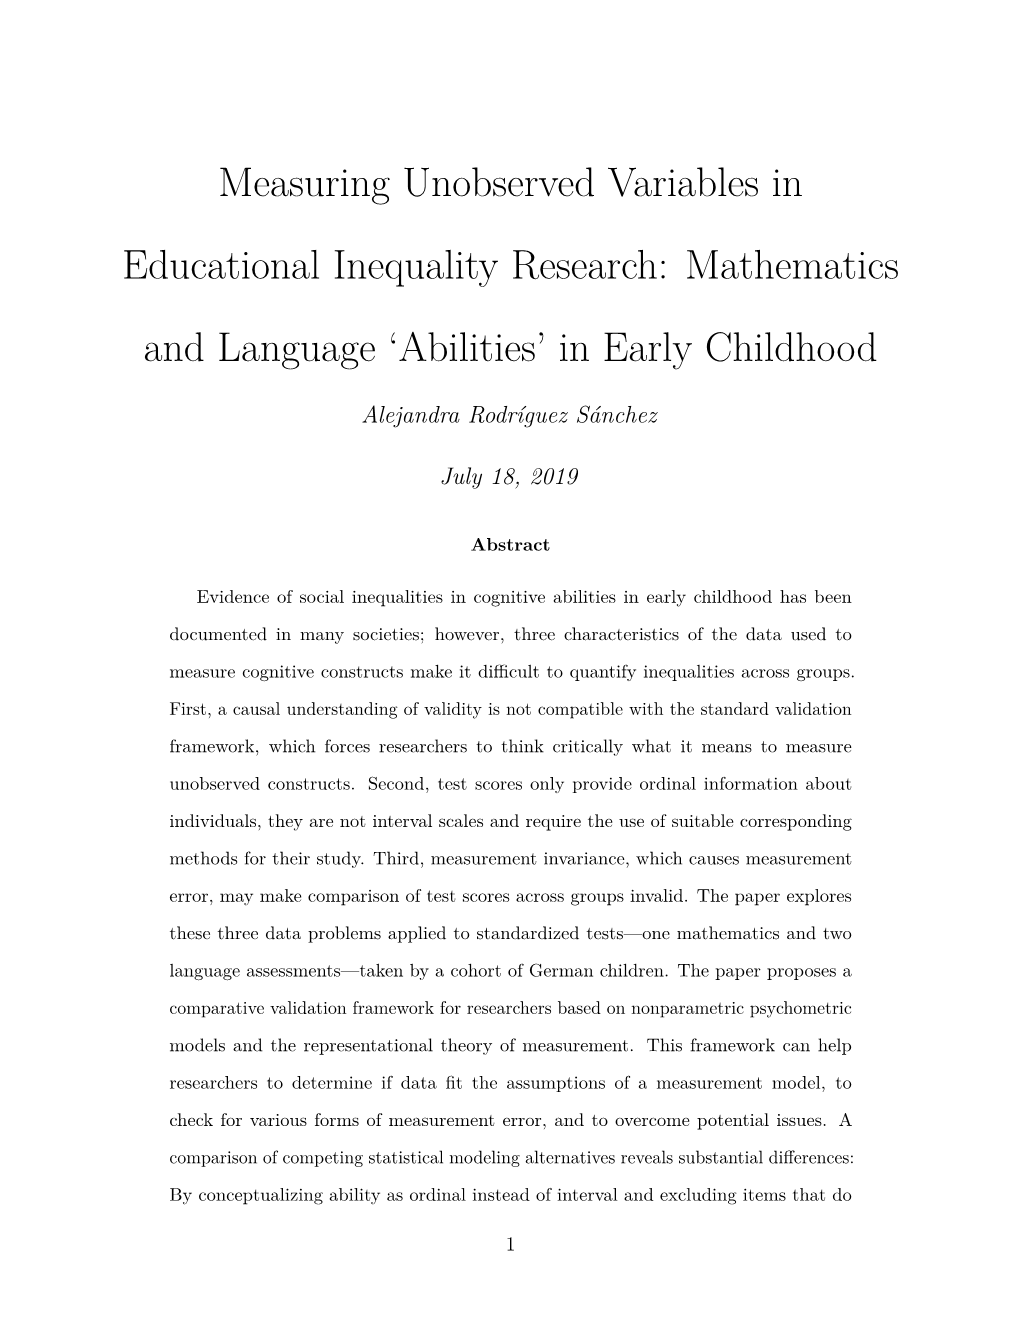 Measuring Unobserved Variables in Educational Inequality Research: Mathematics and Language ‘Abilities’ in Early Childhood